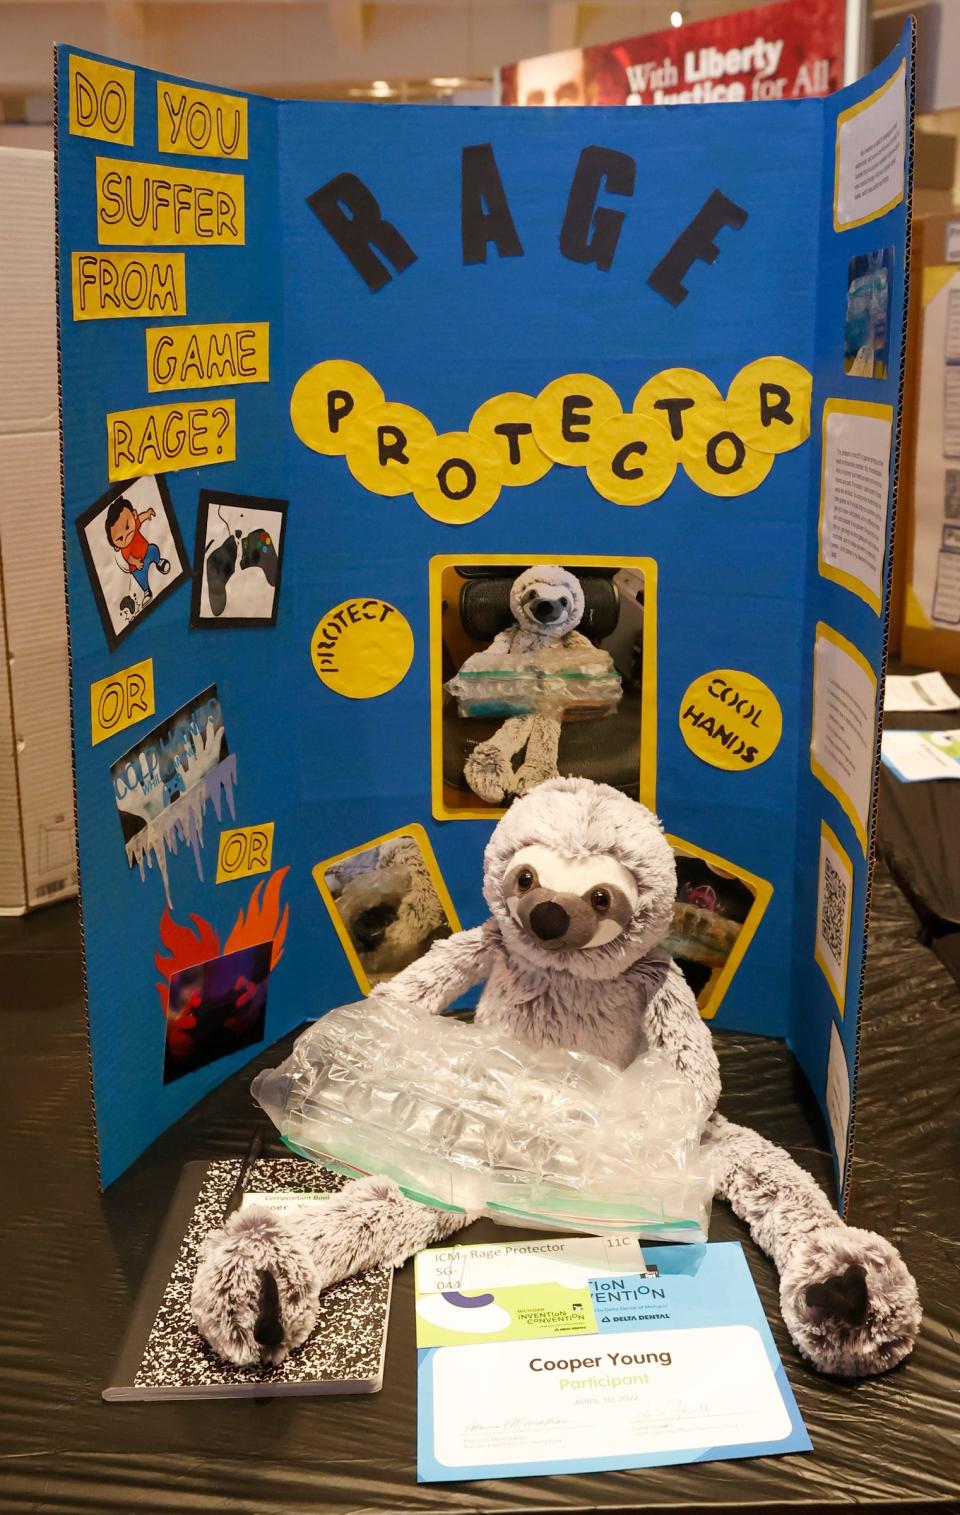 Some of the many inventions on display and being judged during the Invention Convention Michigan inside The Henry Ford in Dearborn on April 30, 2022.